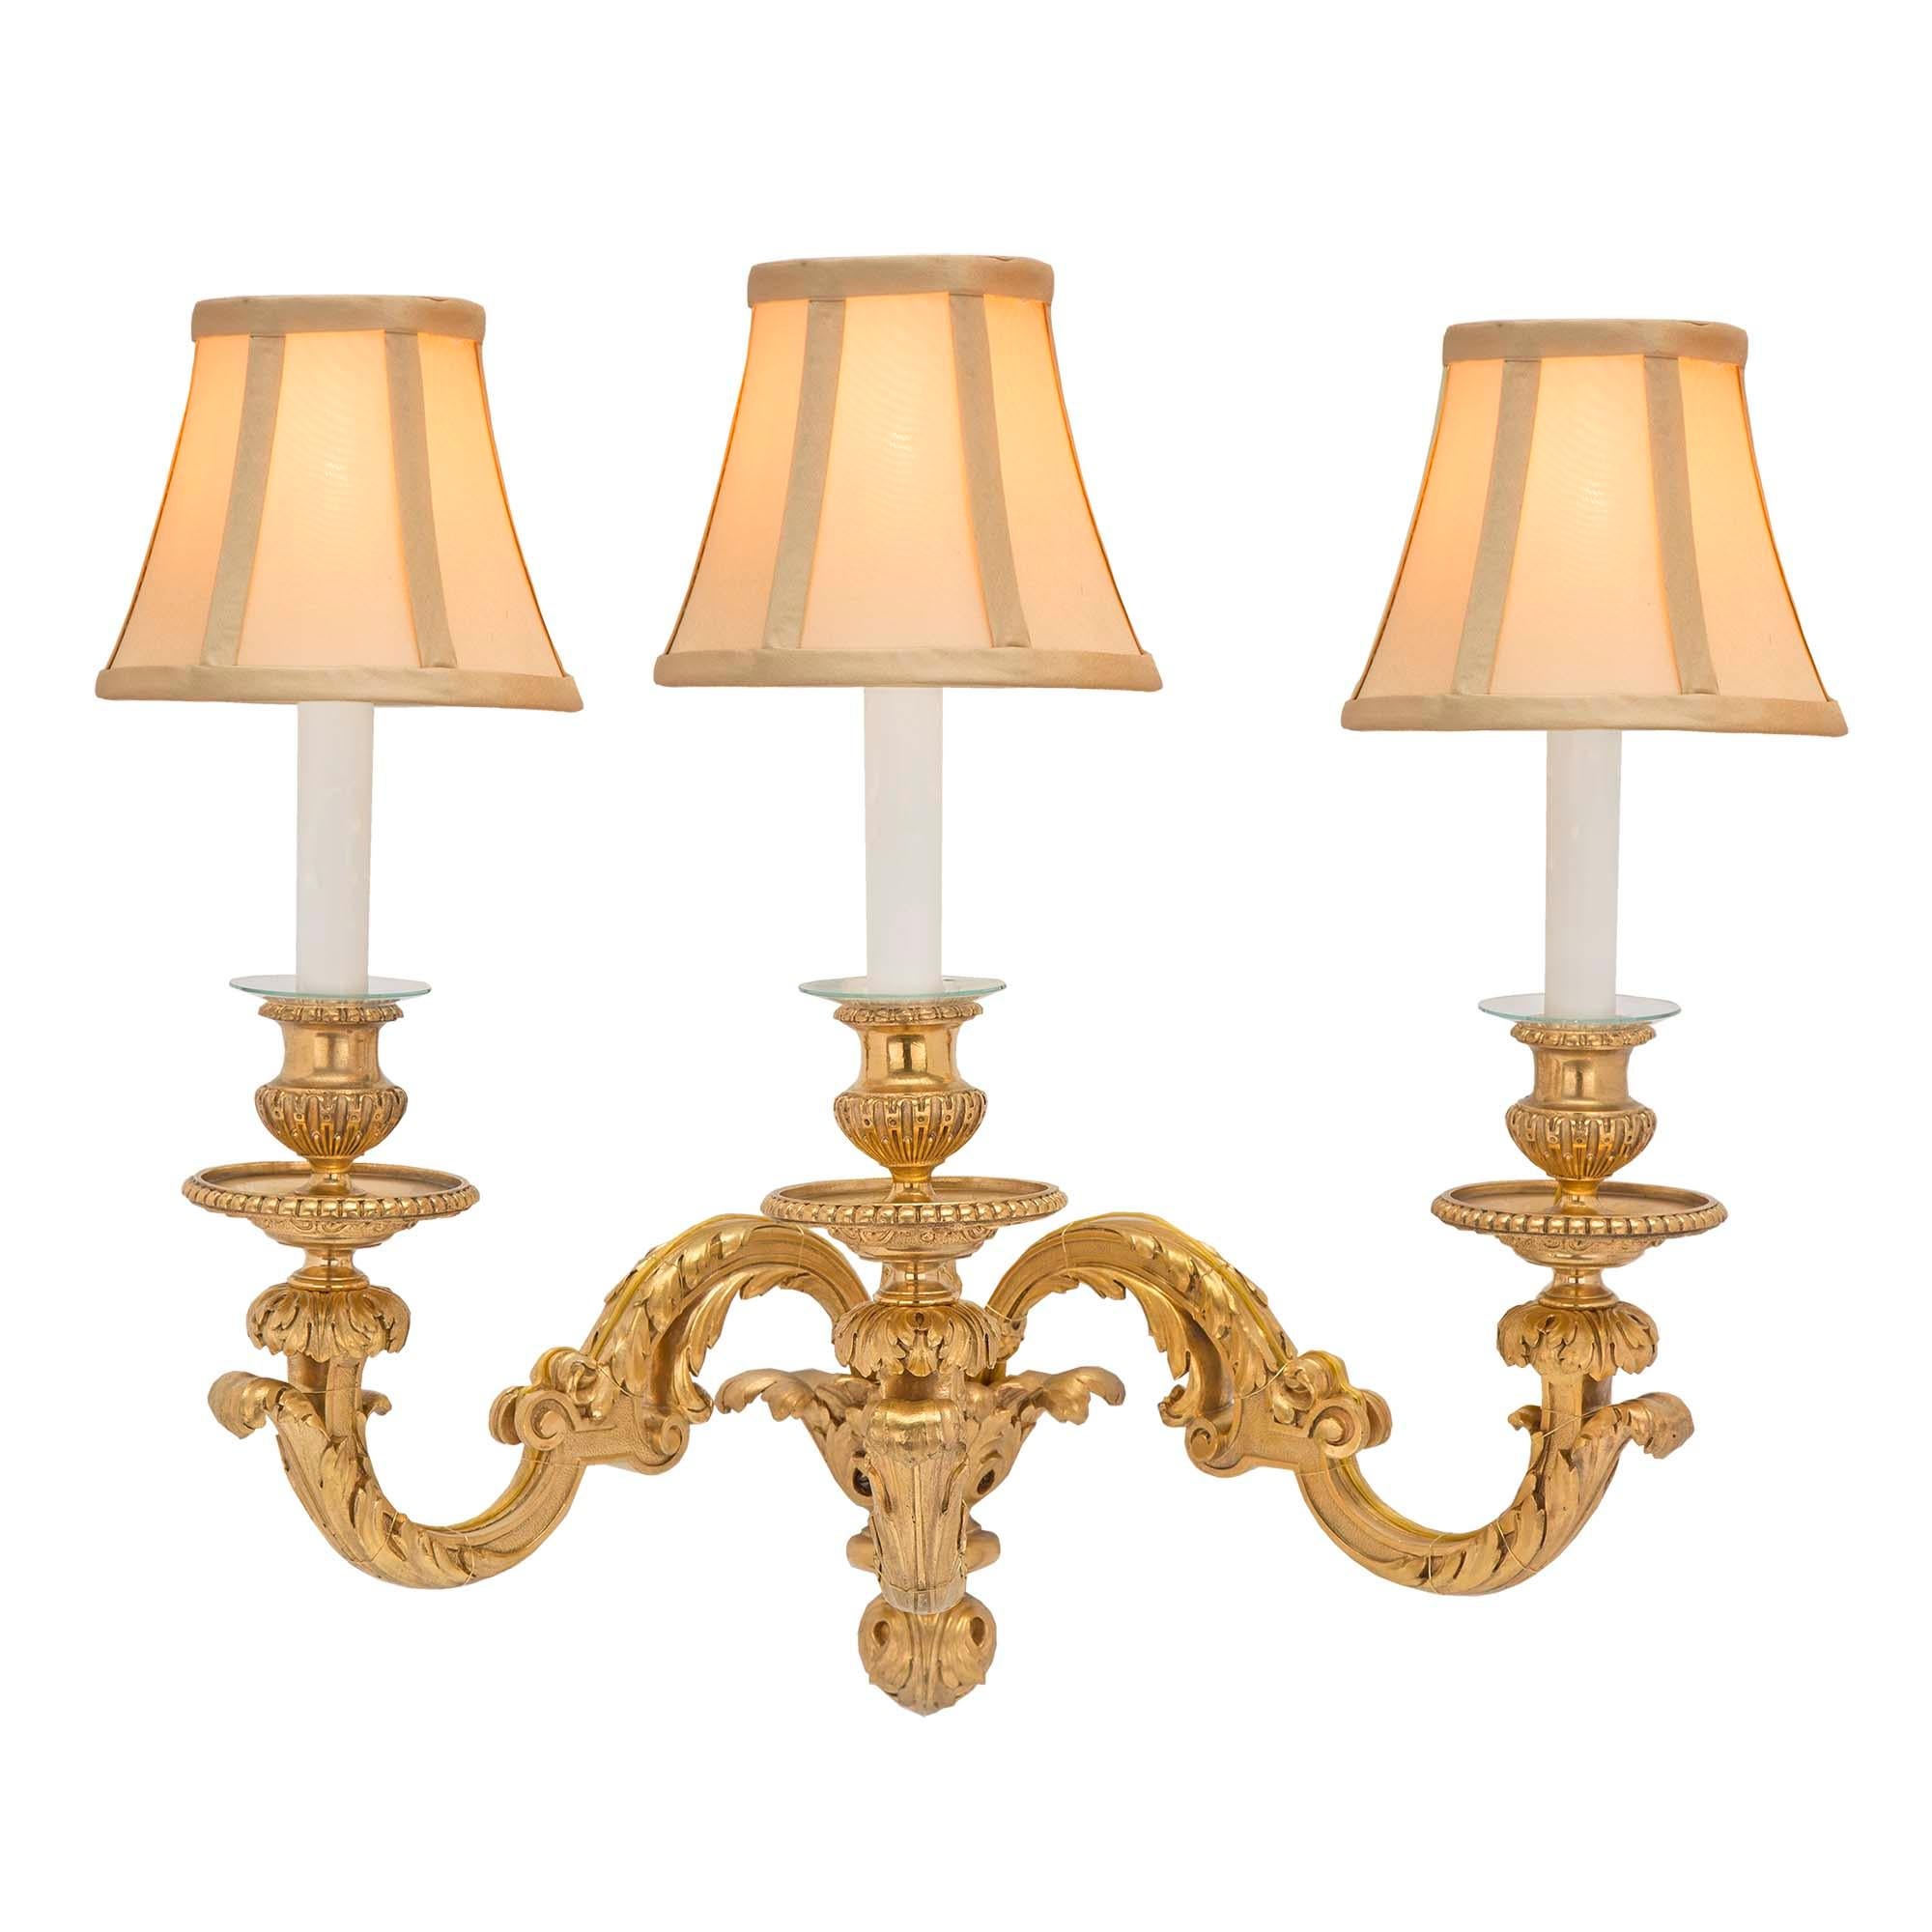 A striking pair of French 19th century Louis XVI st. ormolu sconces. Each three arm sconce is centered by a Fine foliate bottom finial amidst acanthus leaves. The elegantly S scrolled arms are adorned with large richly detailed acanthus leaves. The